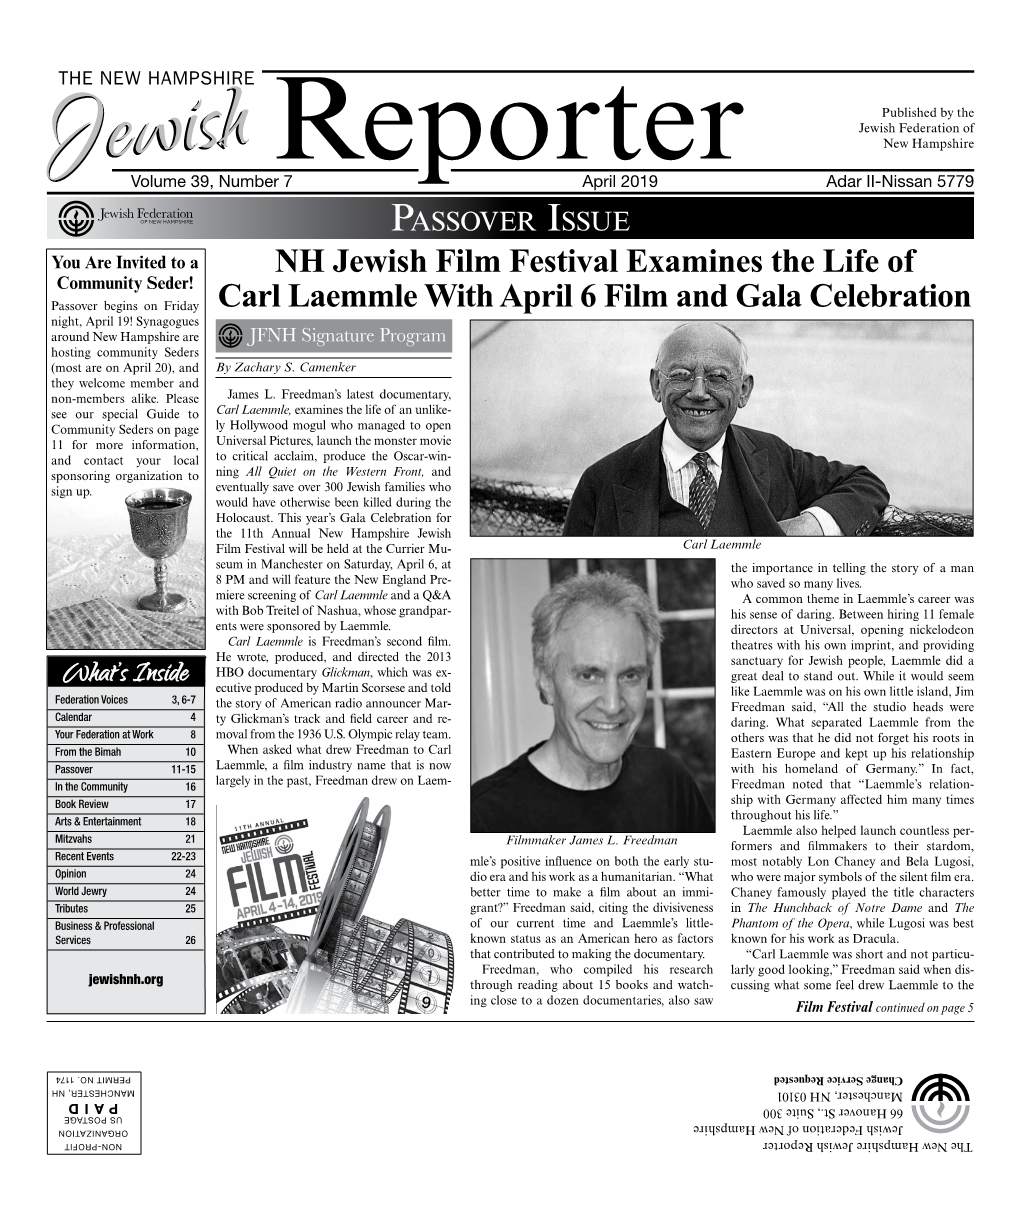 NH Jewish Film Festival Examines the Life of Carl Laemmle with April 6